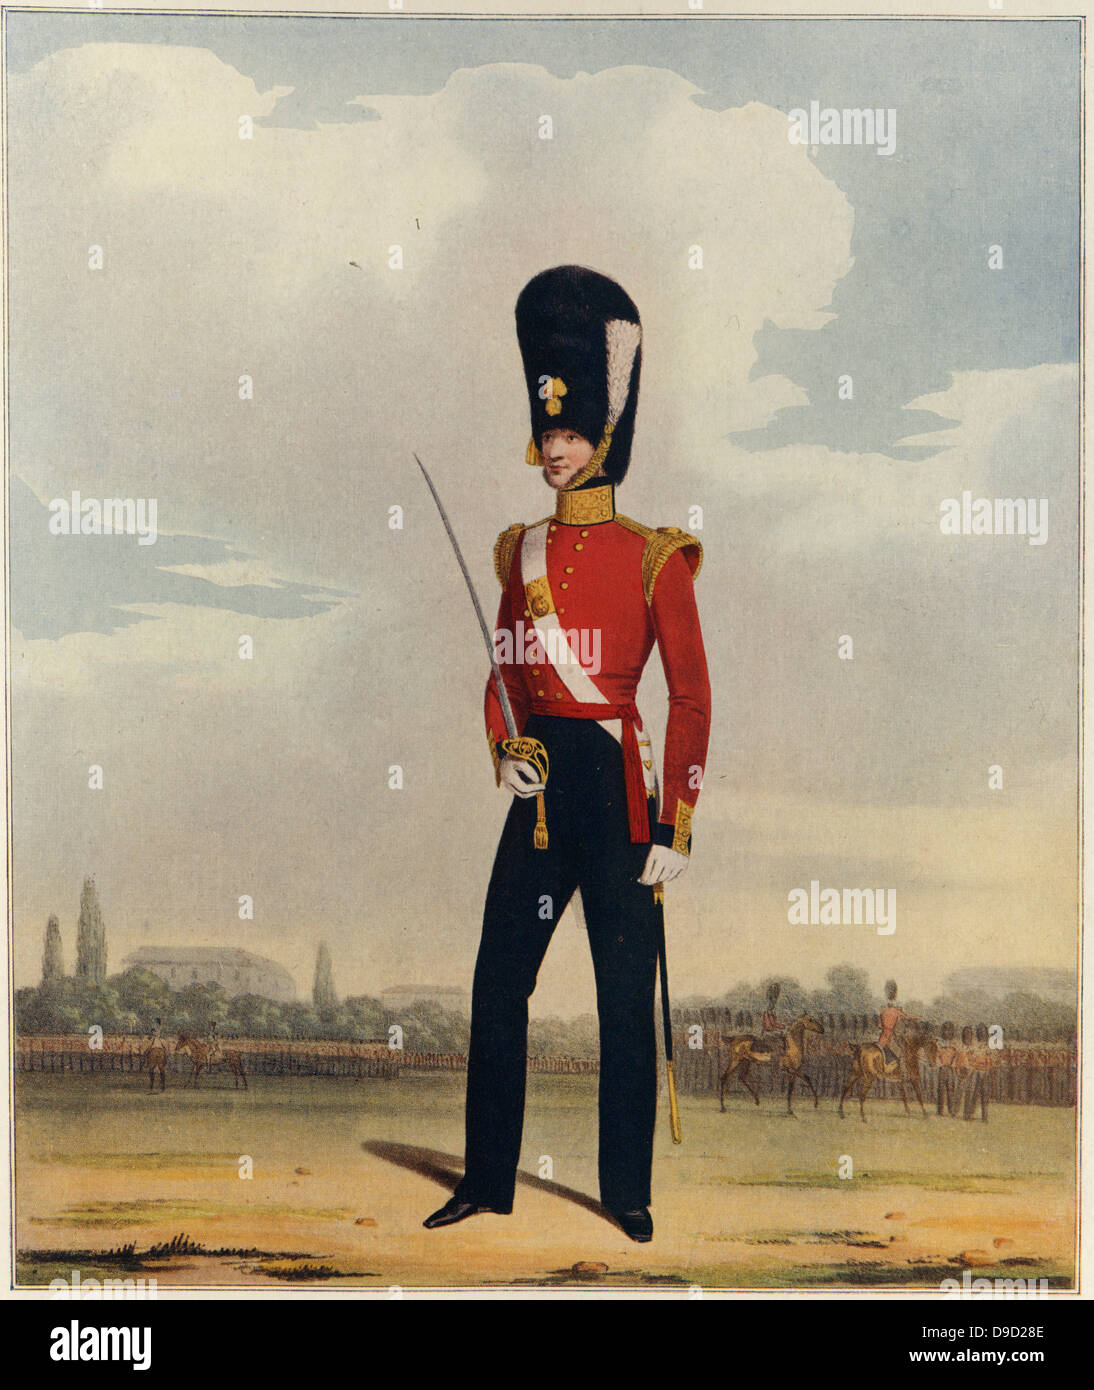 Officer of the 87th, Royal Irish, Fusiliers.  Illustration by L. Mansion and L. Eschauzier for Military and Naval Costumes, London, 1830-1840. Stock Photo